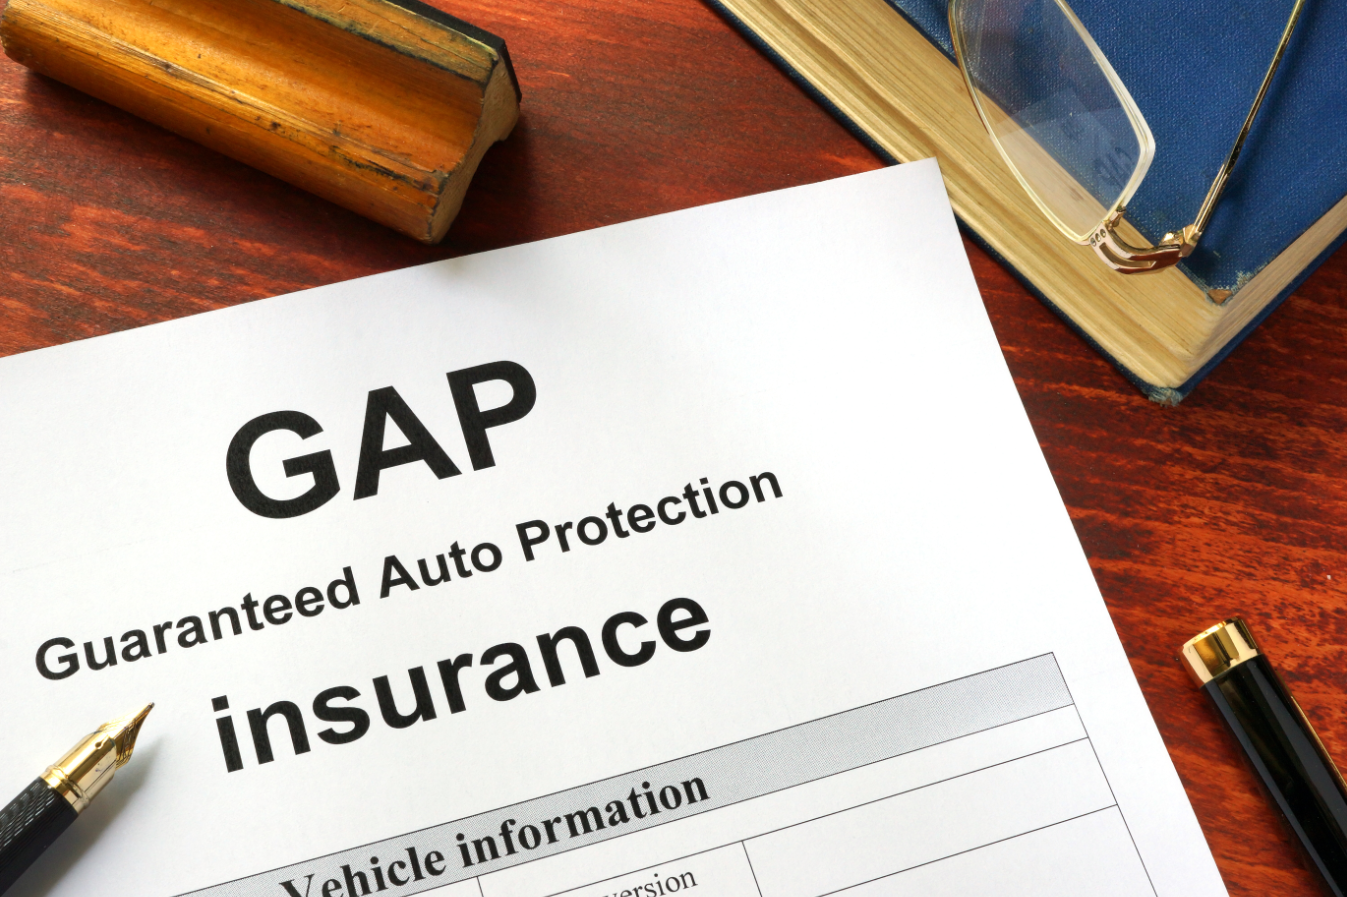 What Is GAP Insurance?